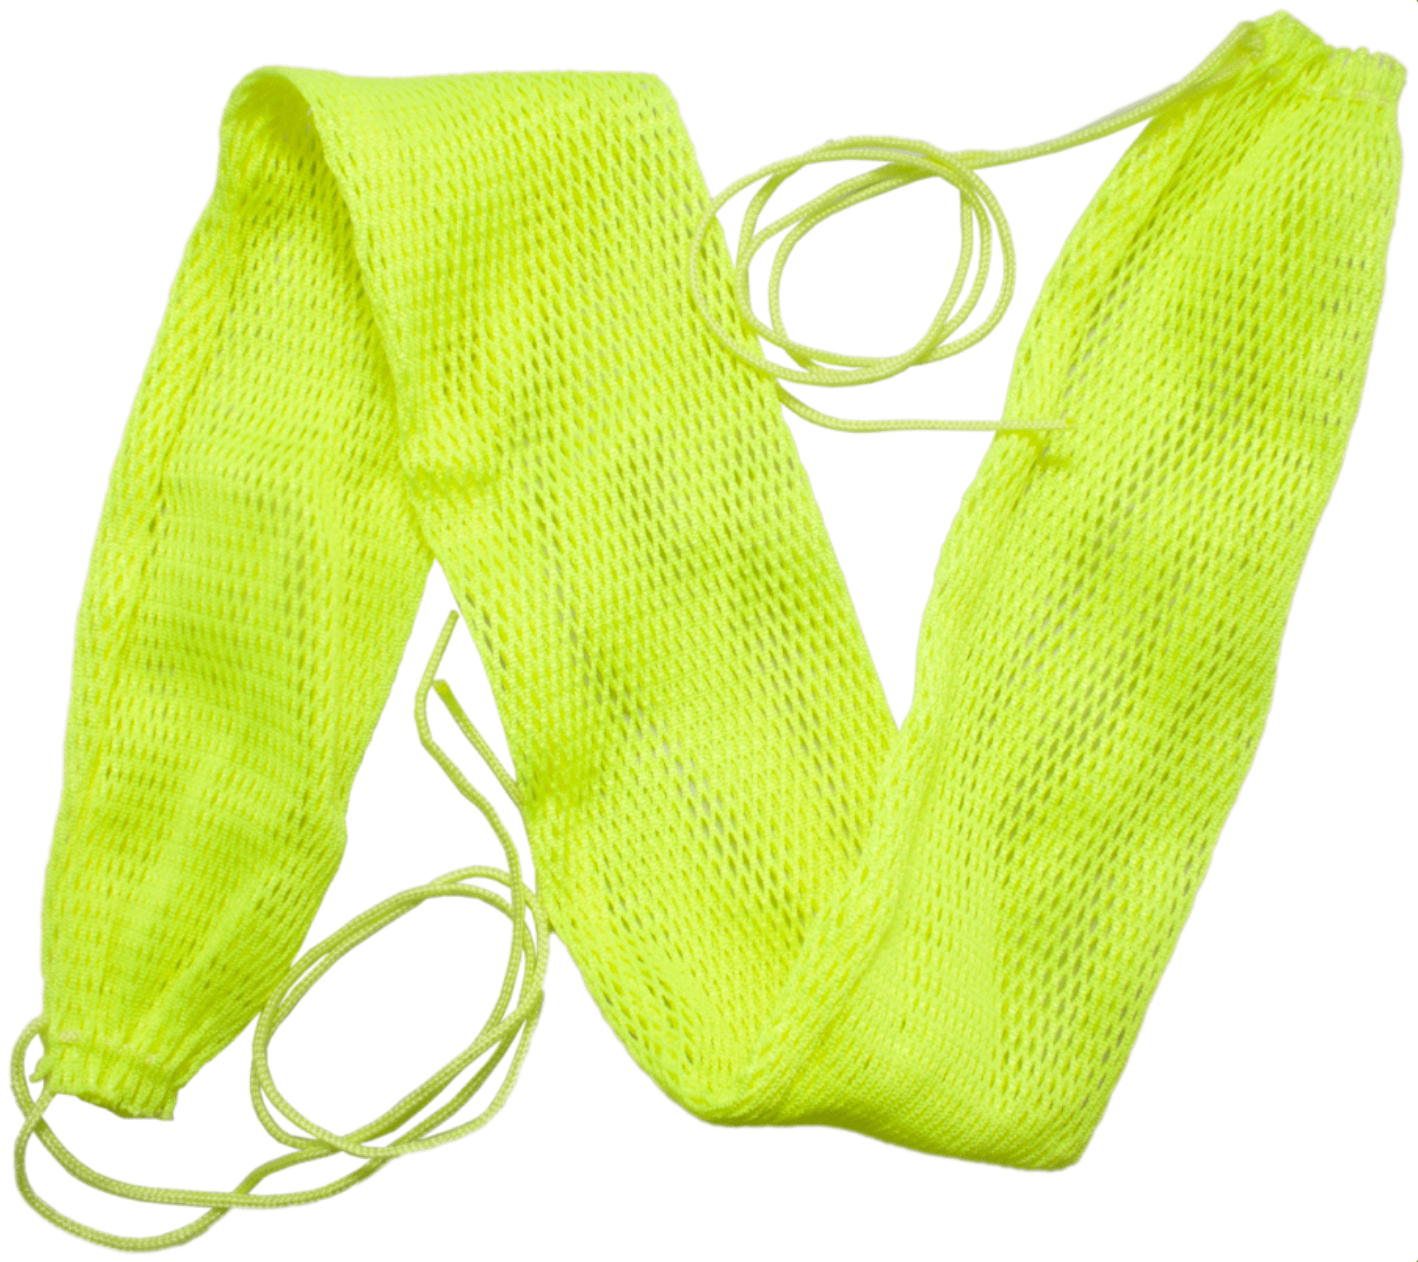 Nautilus Nautilus Nylon Cylinder Protection Net for 7 l 140 mm diameter YELLOW by Oyster Diving Shop